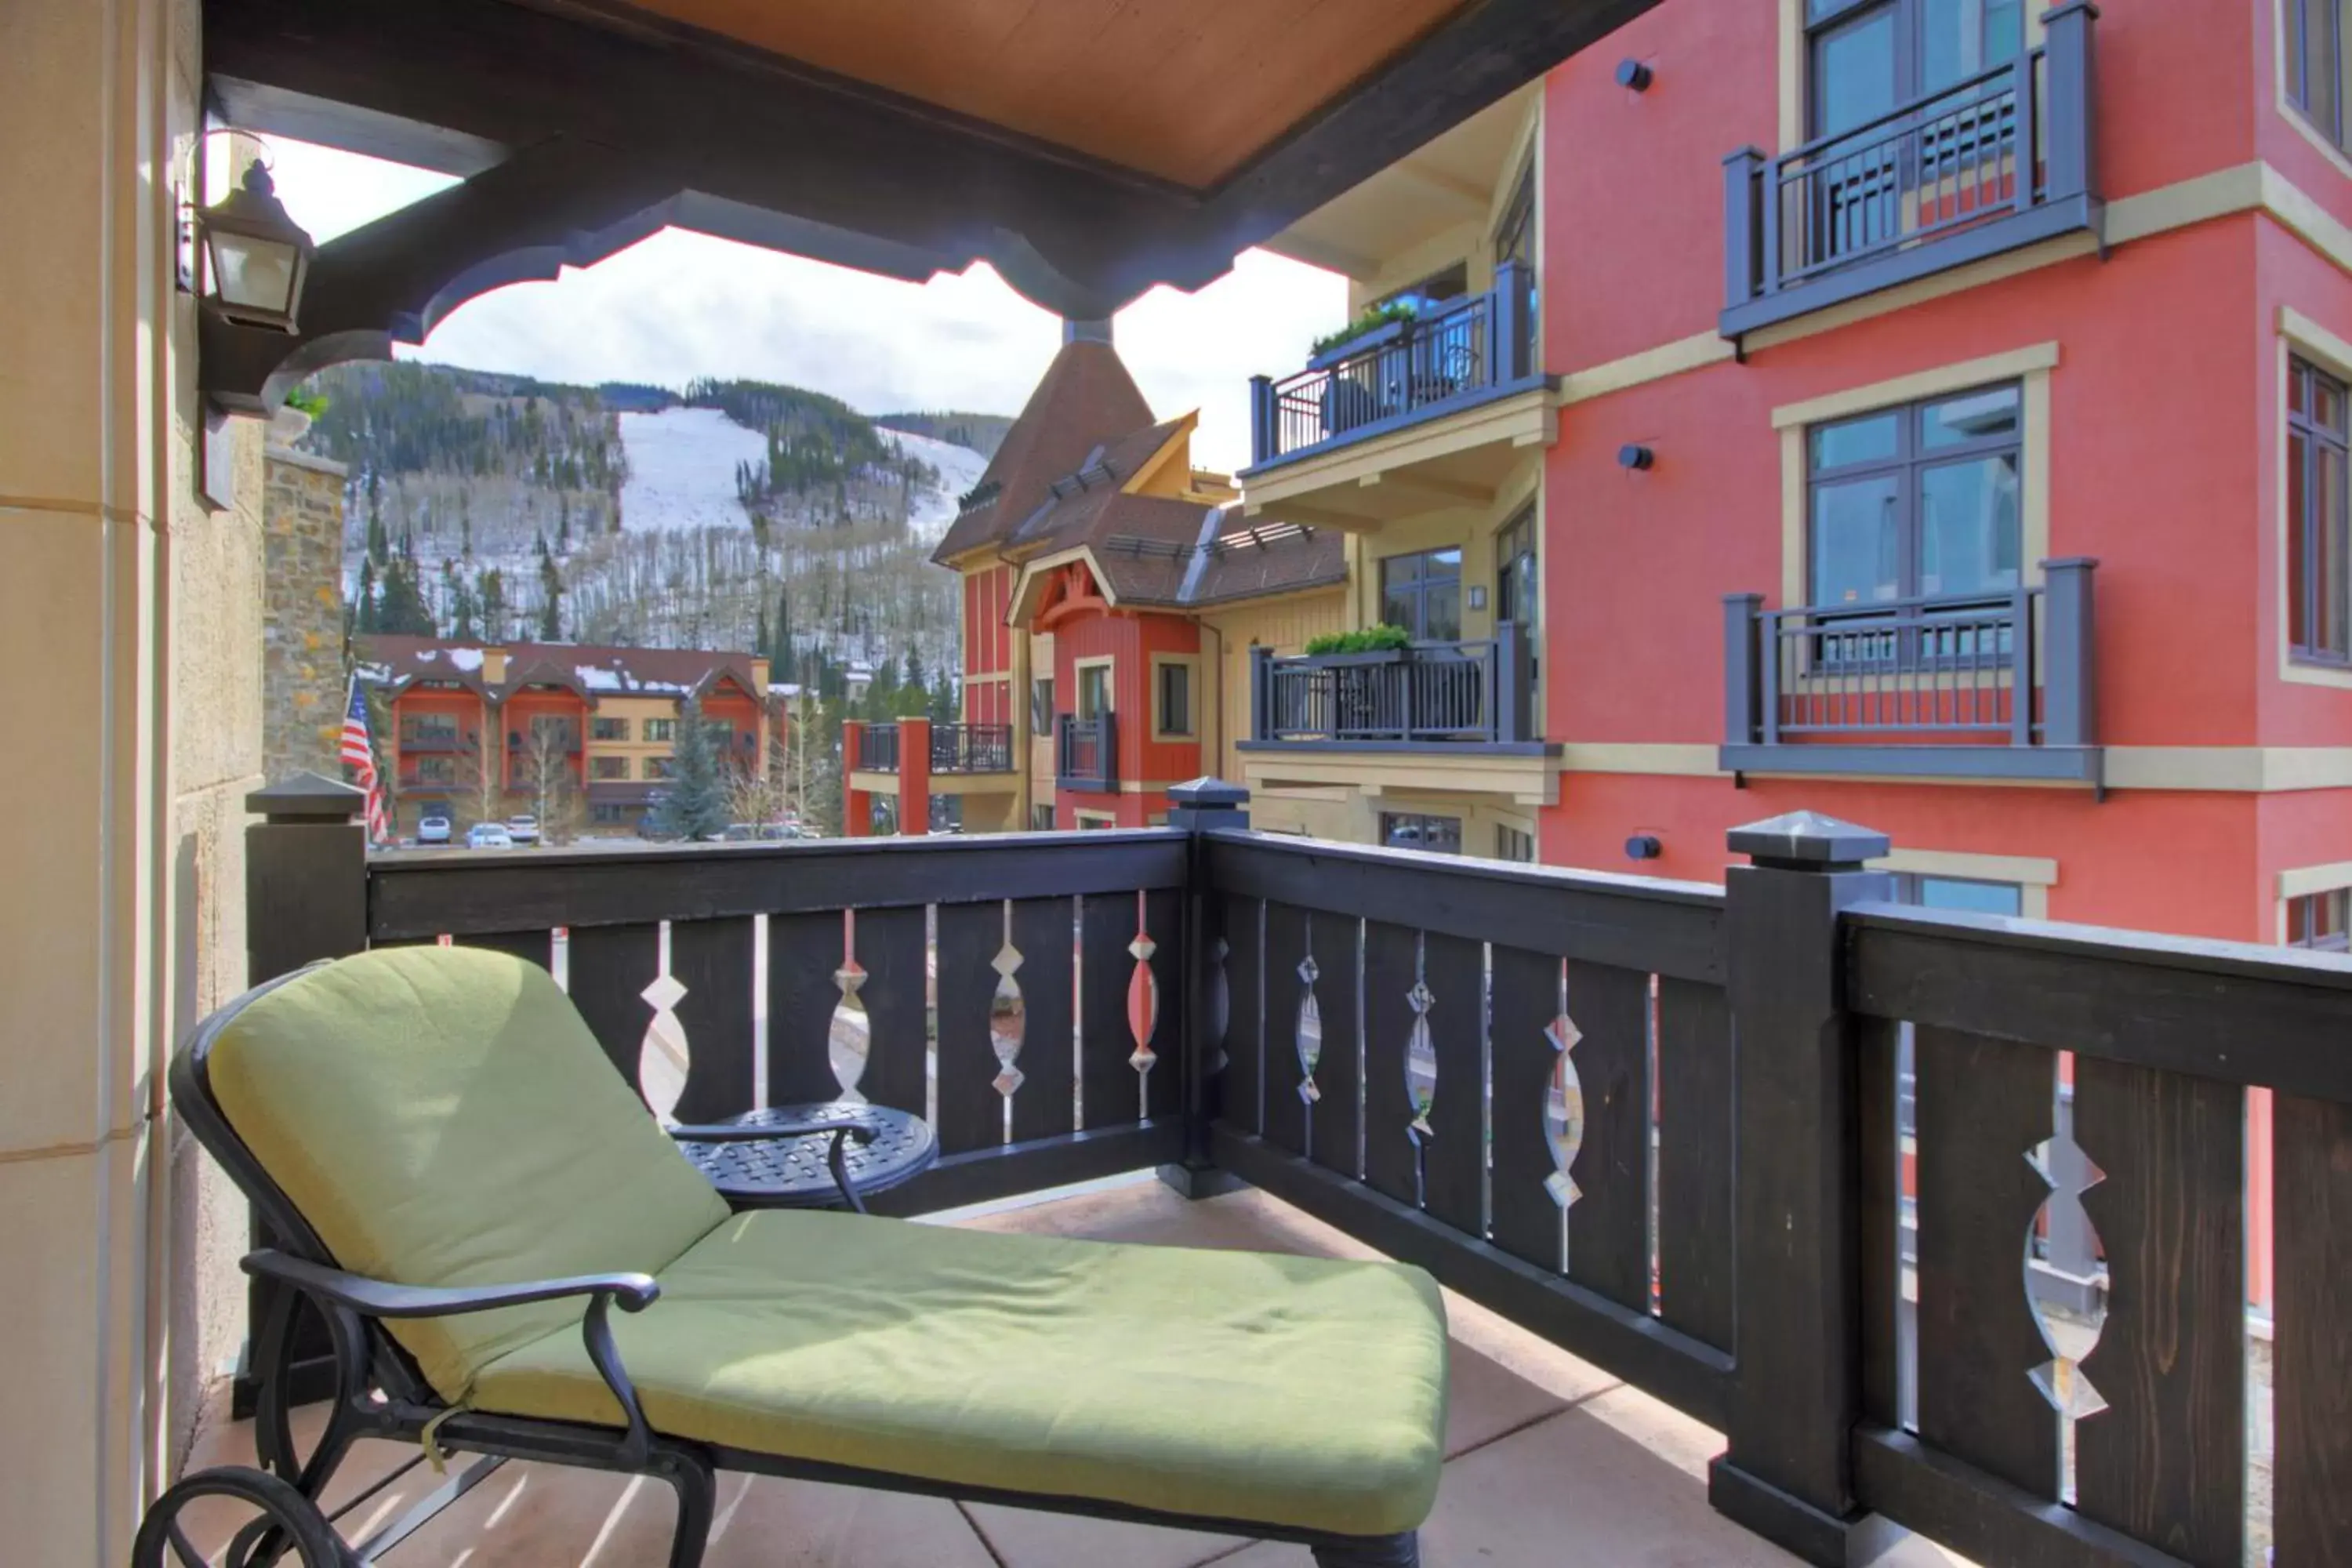 Balcony/Terrace in The Arrabelle at Vail Square, a RockResort